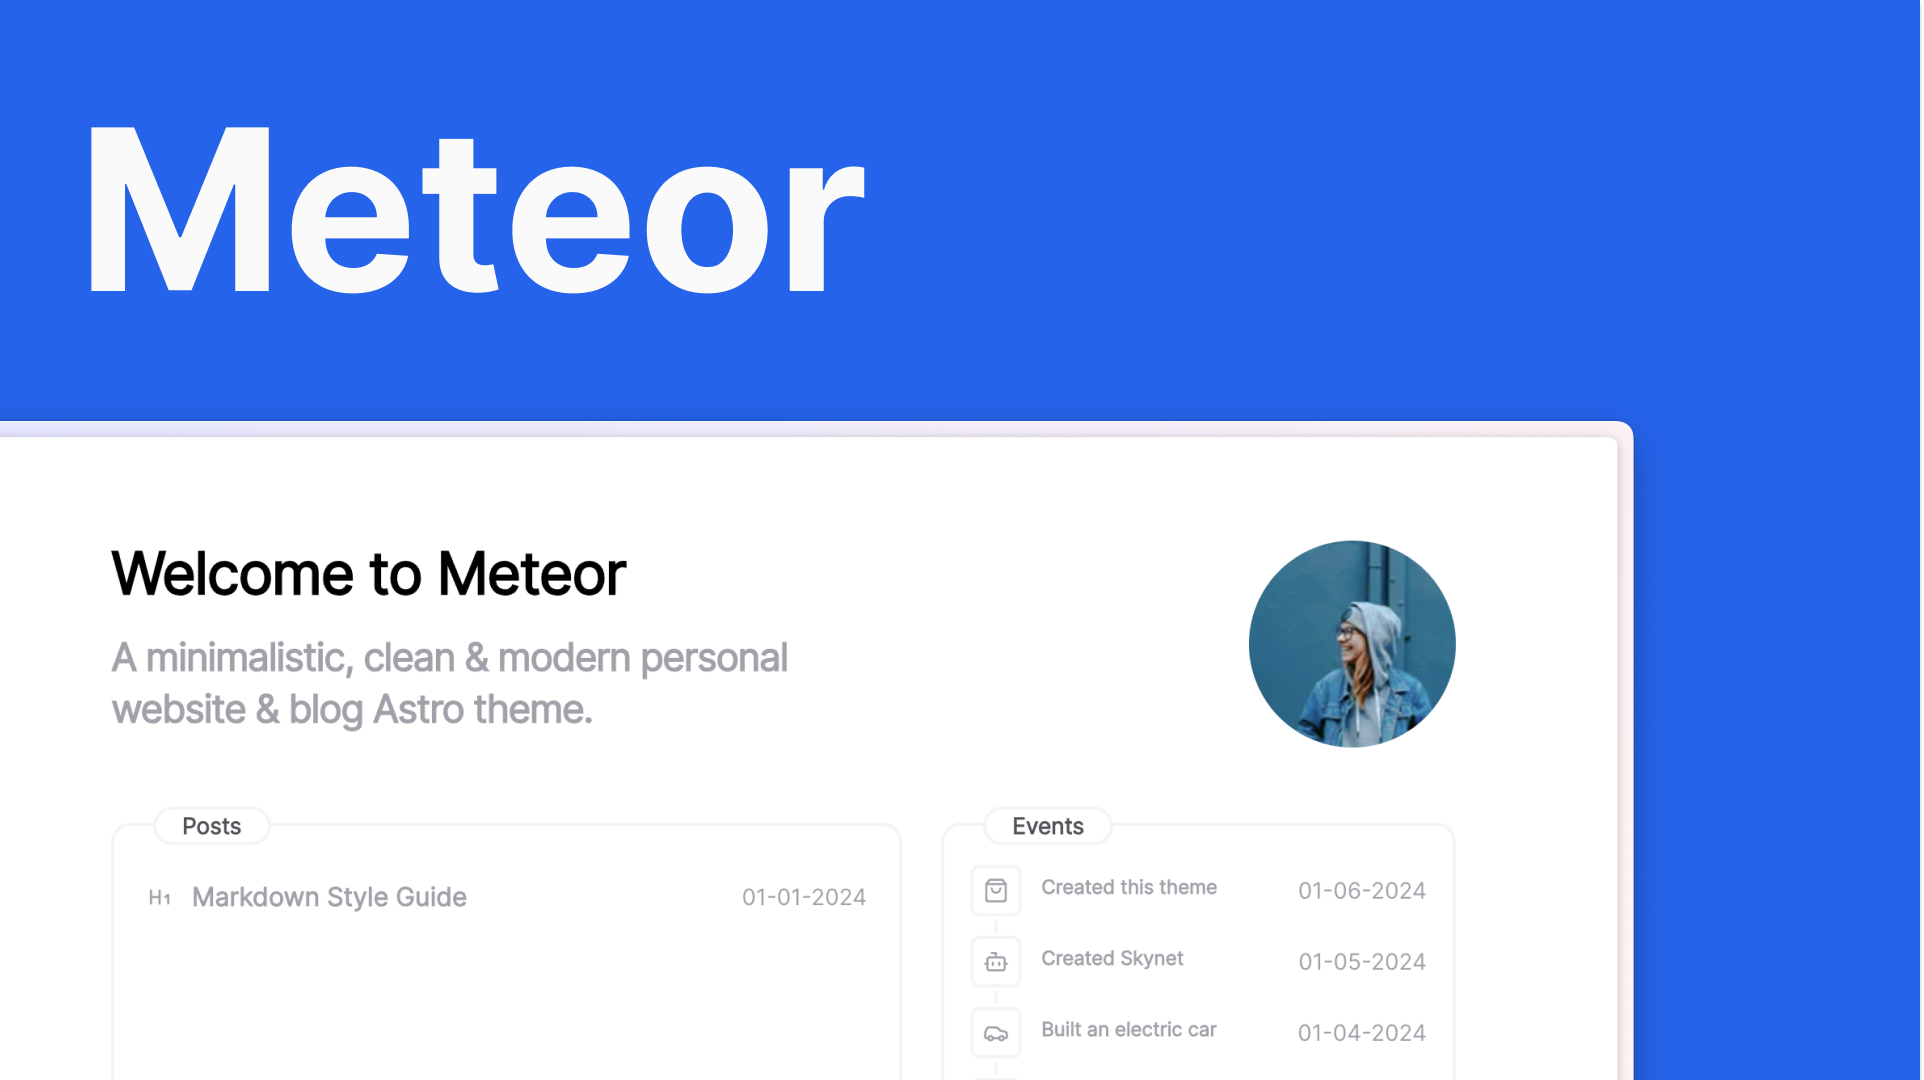 A vibrant blue background with large text saying "Meteor" in the top left & a screenshot showing the Astro theme in use